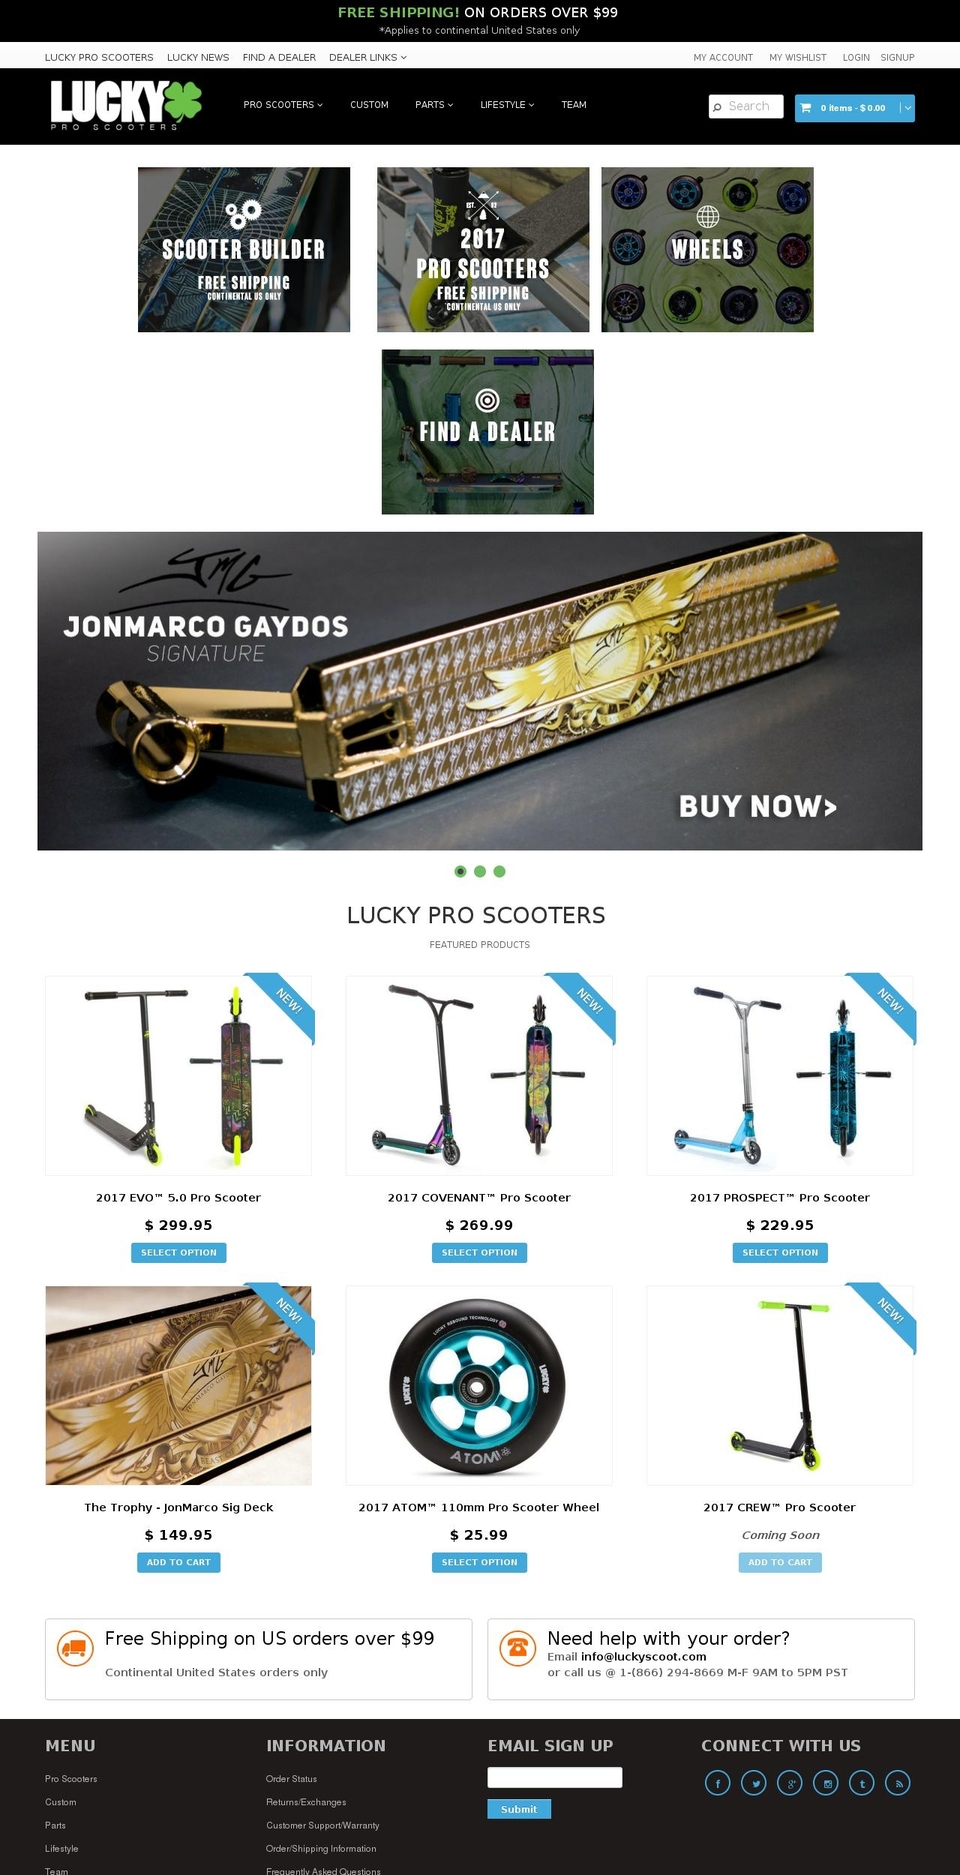 Lucky Scooters Live Theme 2-17-2017 Shopify theme site example luckyproscooters.com